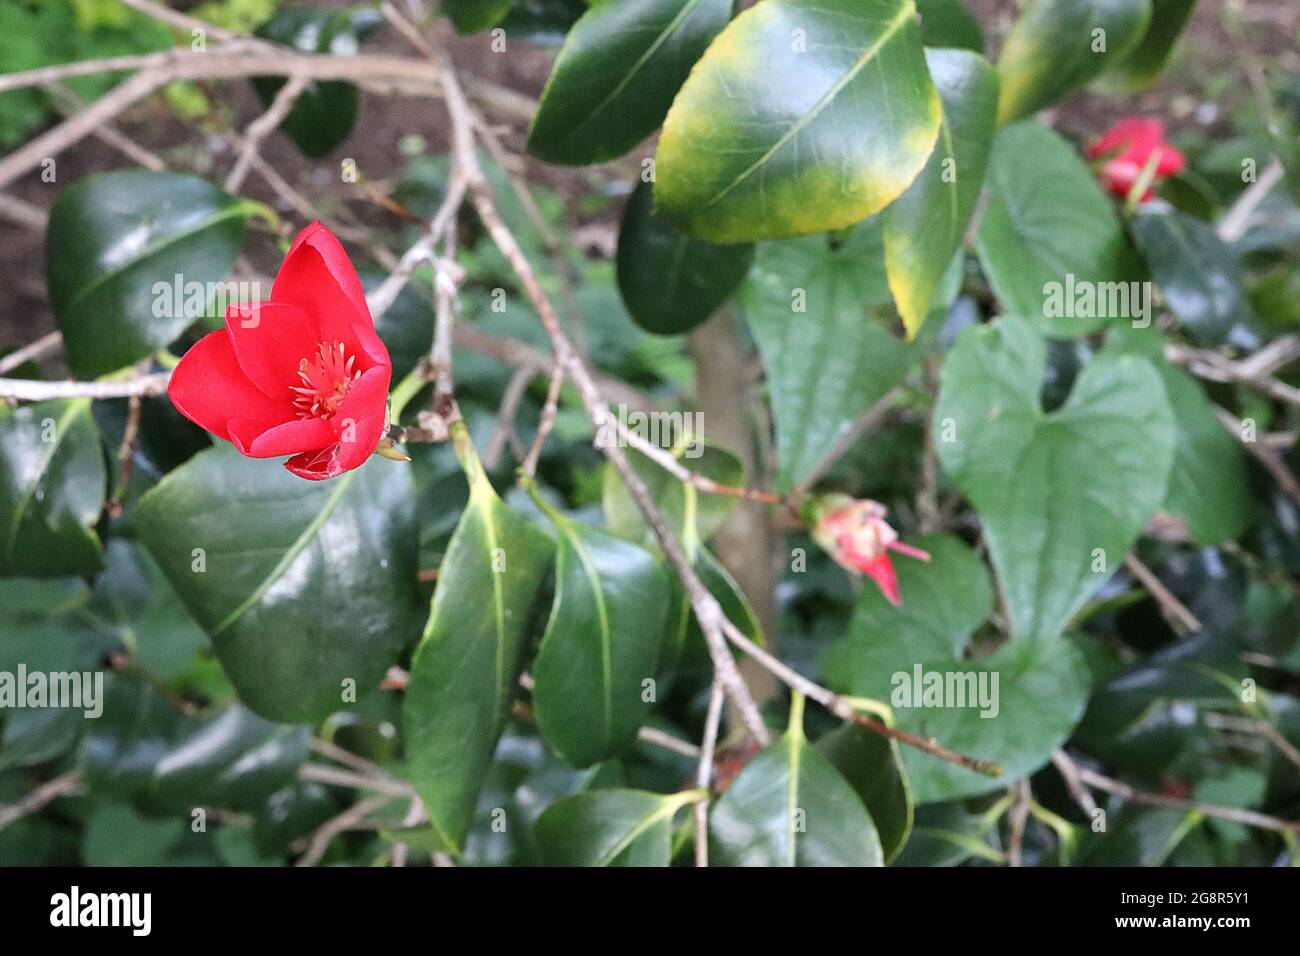 Camellia japonica ‘Korean Fire’ Japanese camellia Korean Fire – small single scarlet red flowers,  May, England, UK Stock Photo